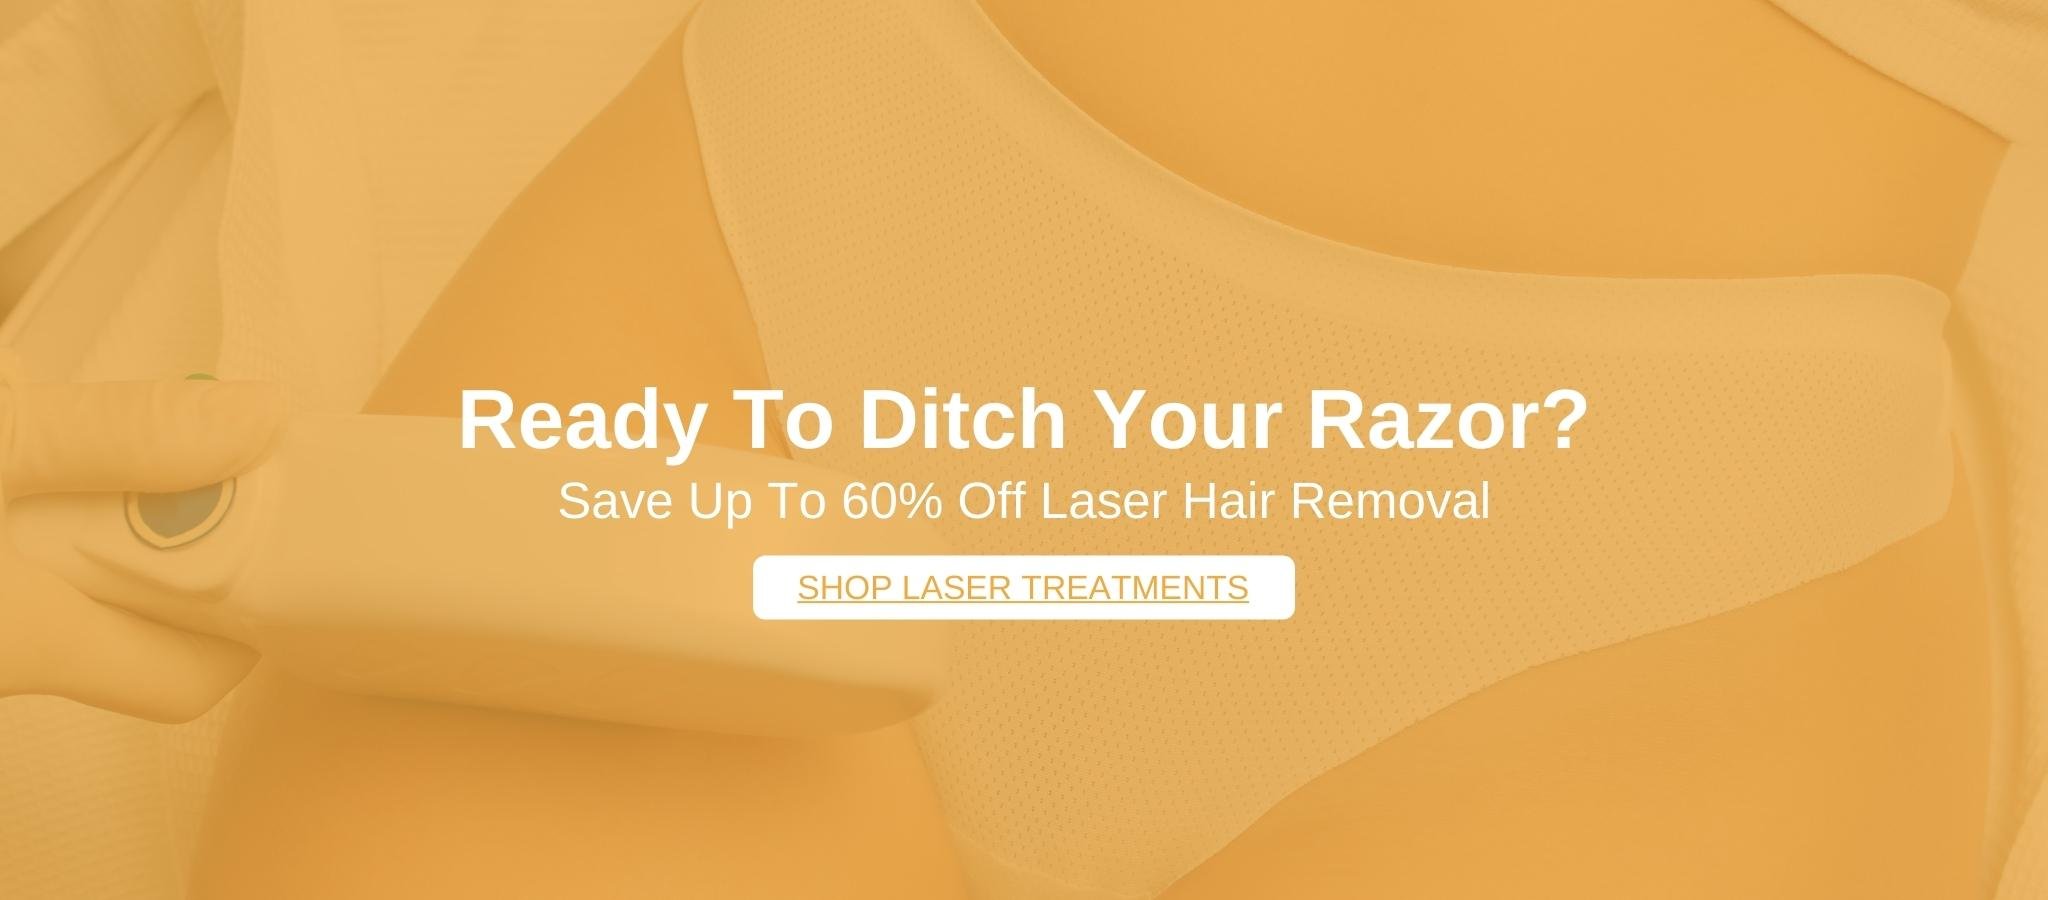 Ditch Your Razor, Try Laser Hair Removal